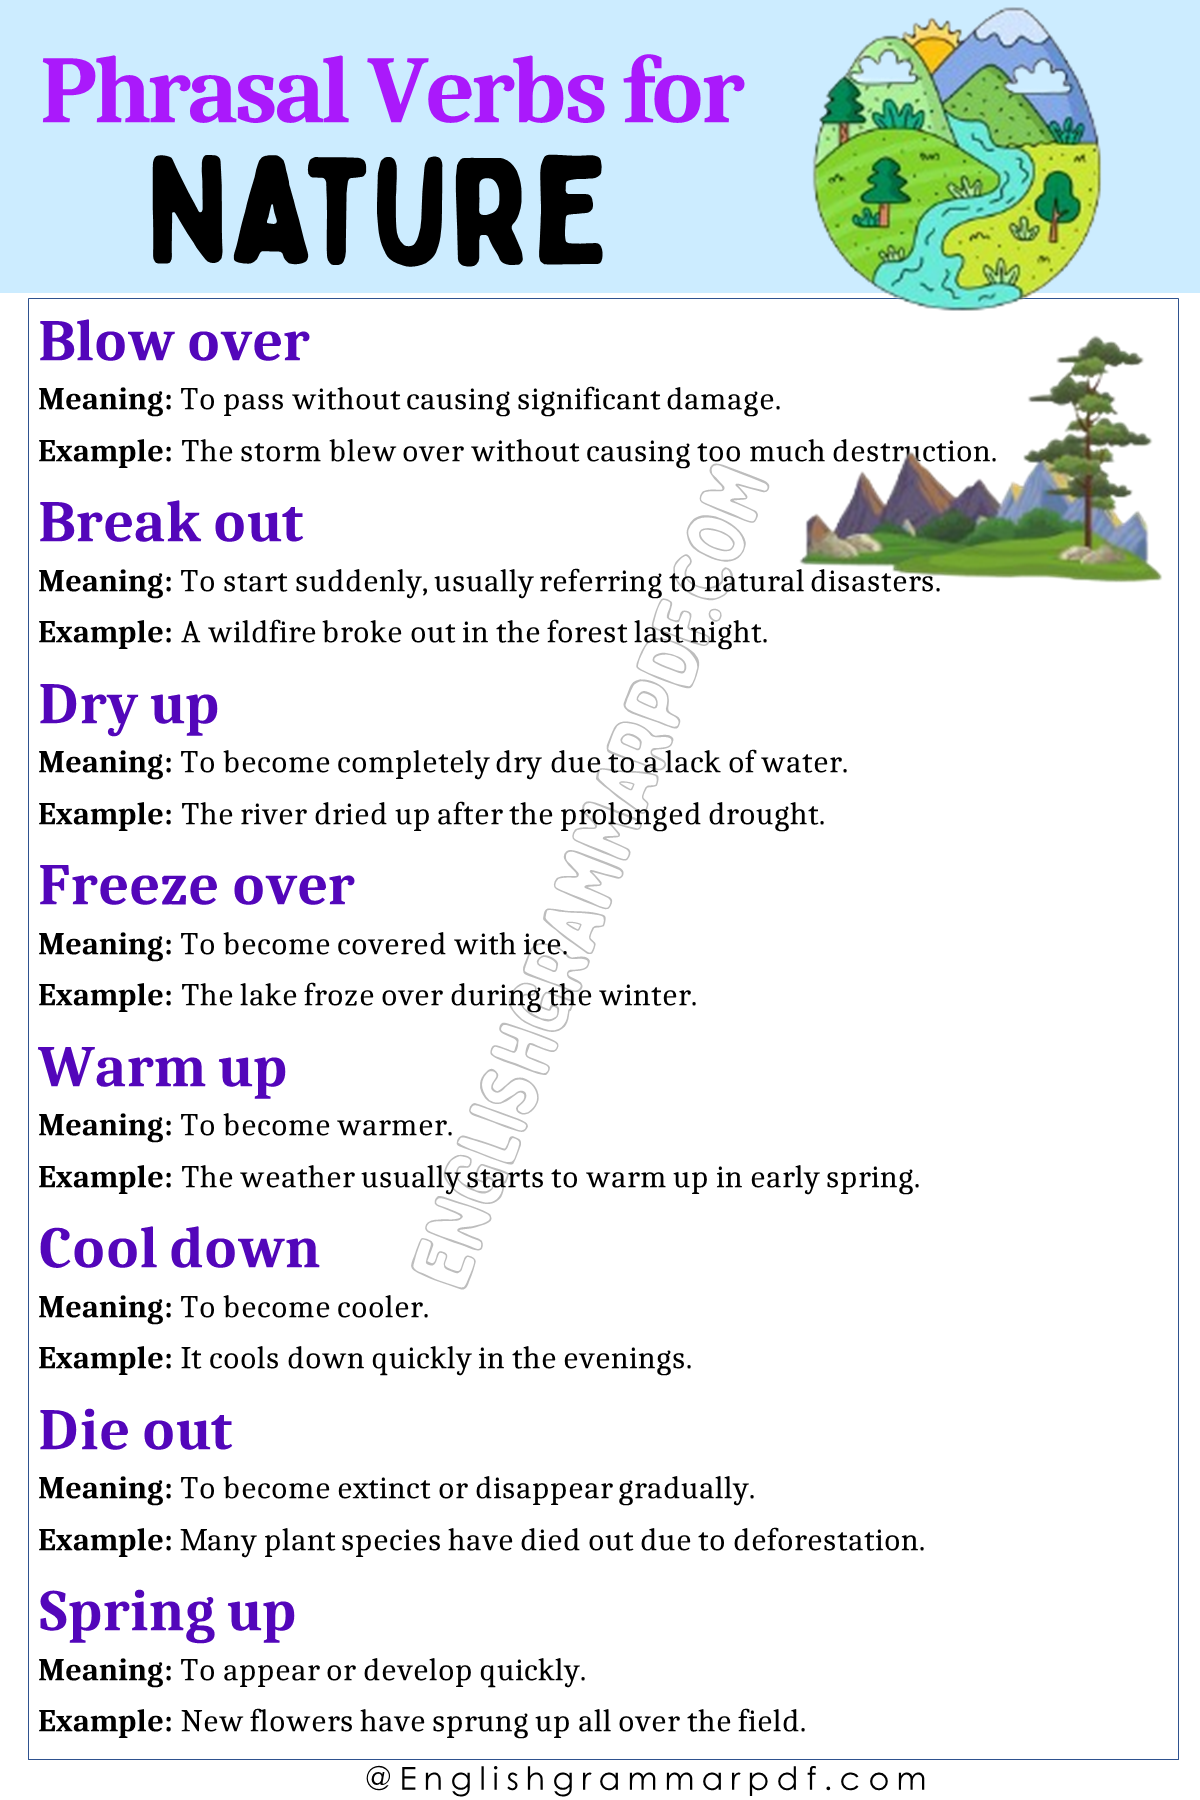 Phrasal Verbs for Nature